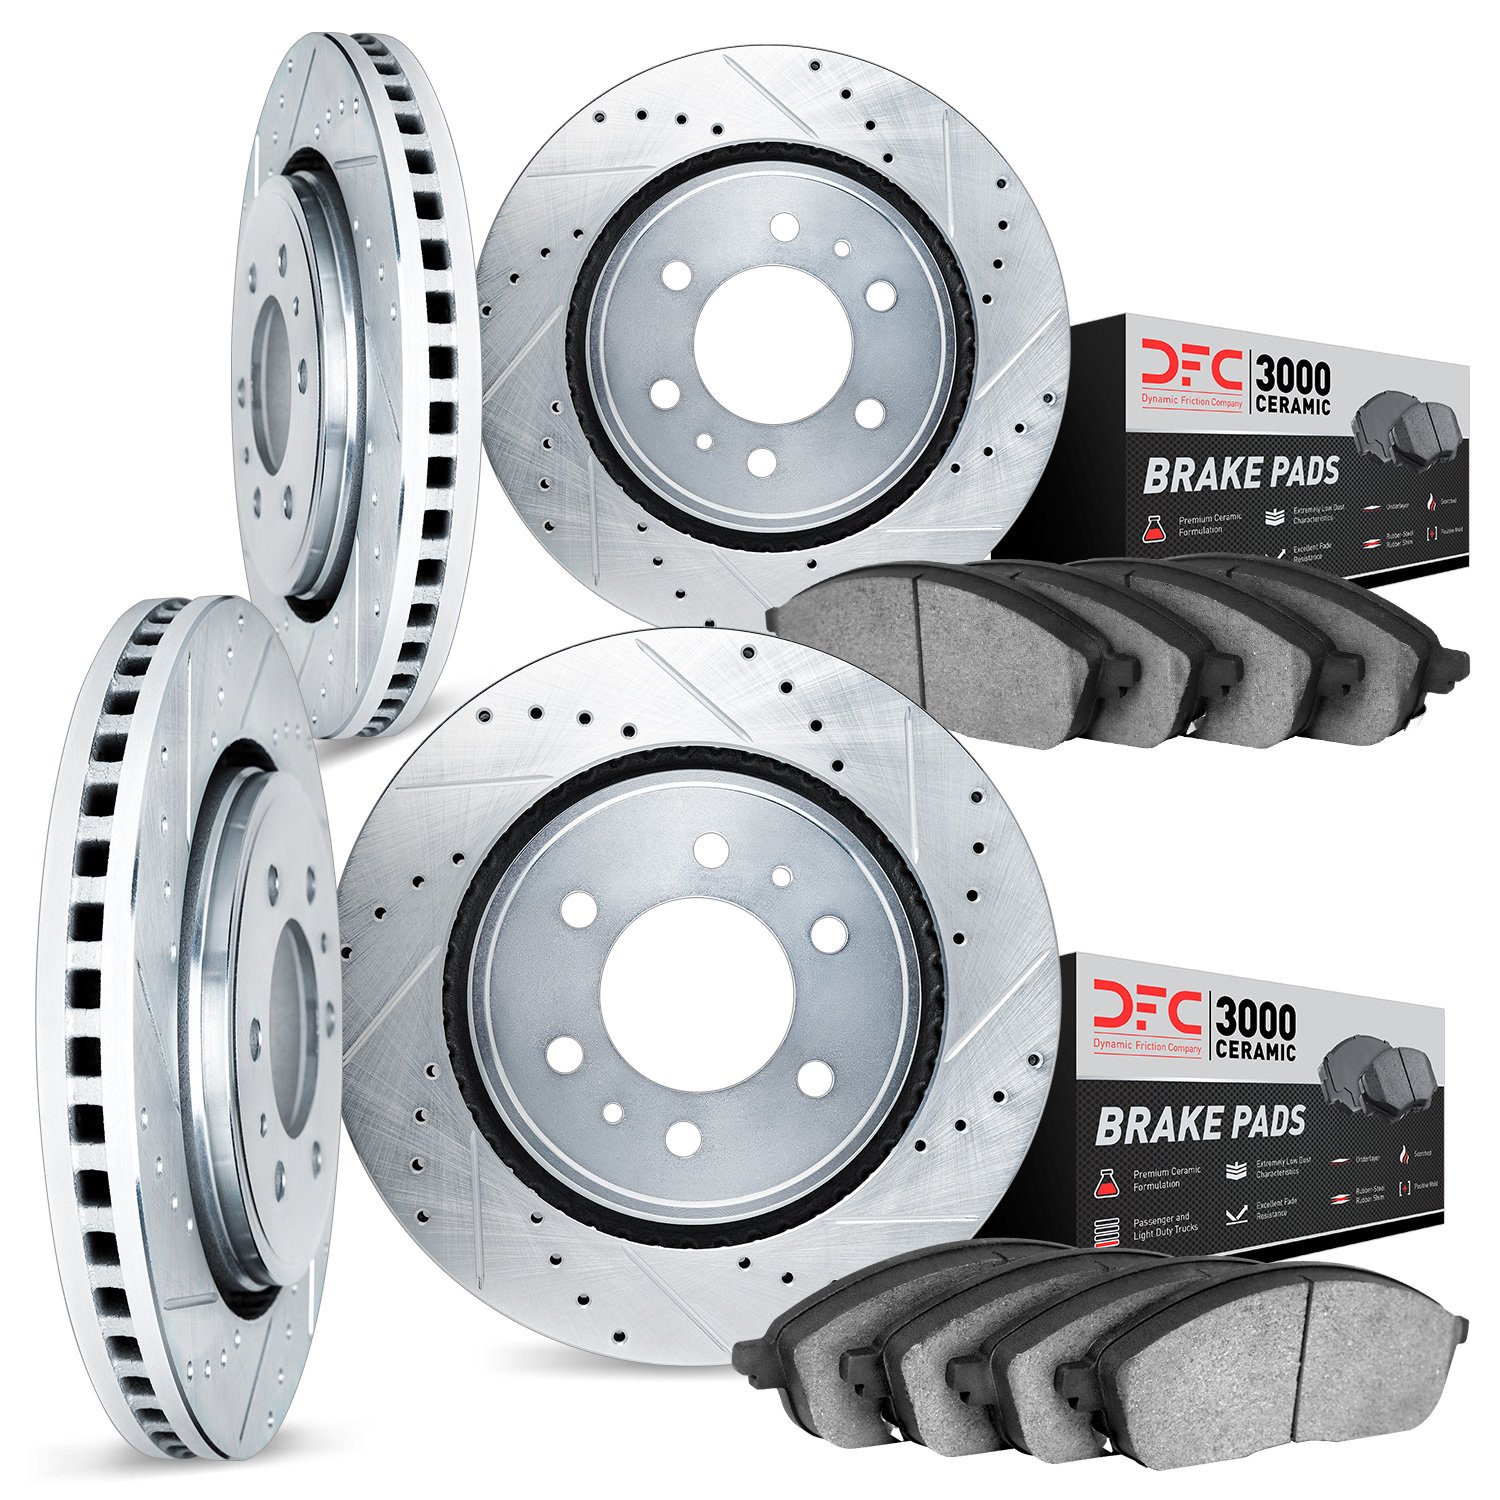 7304-76031 Drilled/Slotted Brake Rotor with 3000-Series Ceramic Brake Pads Kit [Silver], 1993-1997 Lexus/Toyota/Scion, Position: